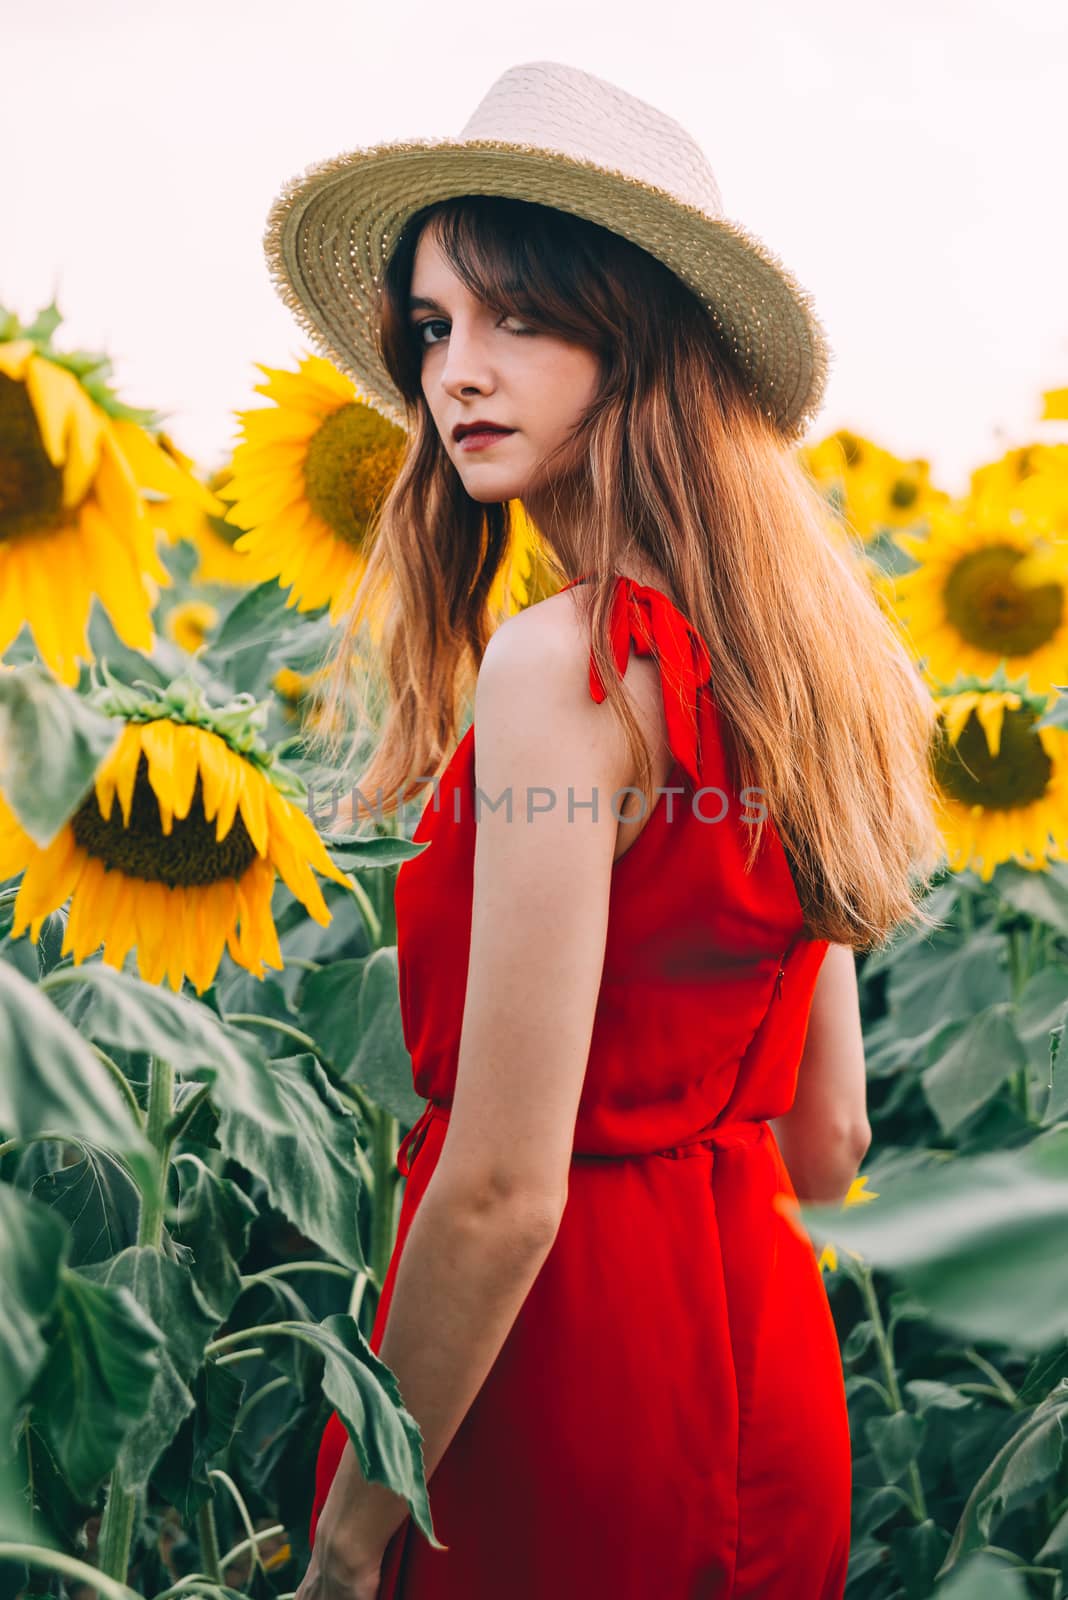 woman with red dress and hat in sunflowers field by Fotoeventis